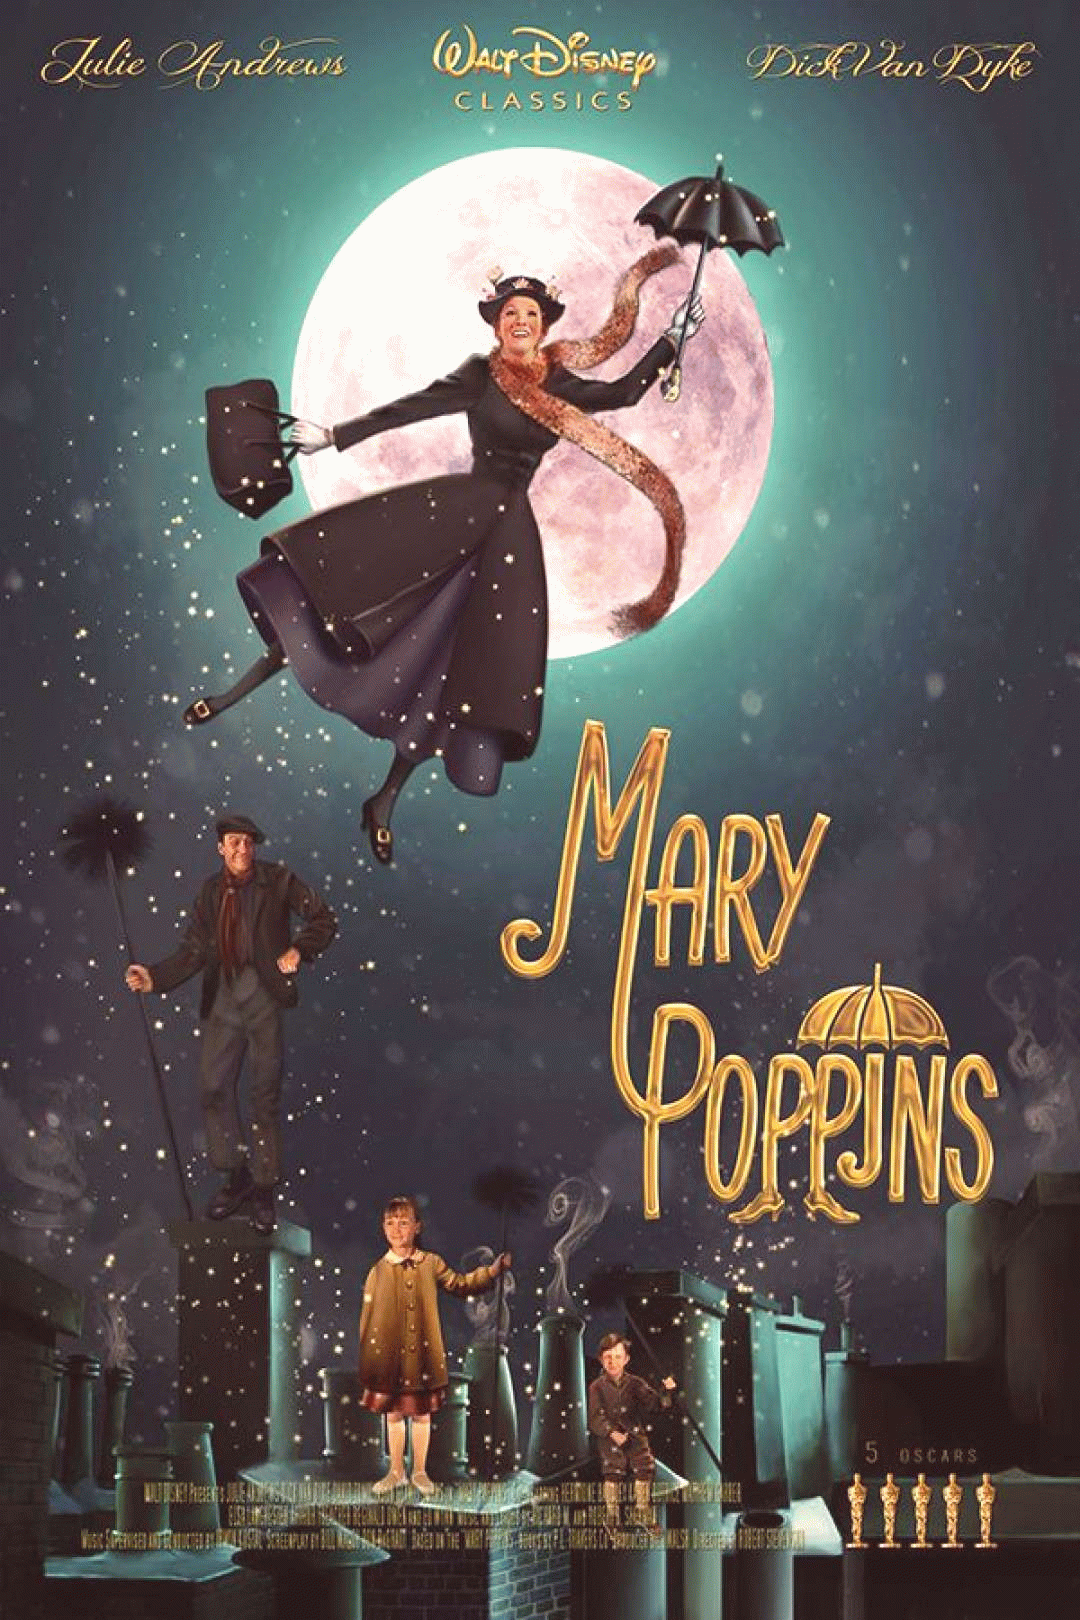 redesign mary poppins poster and dvd case on behance in 2020 fantasia disney quotes medium